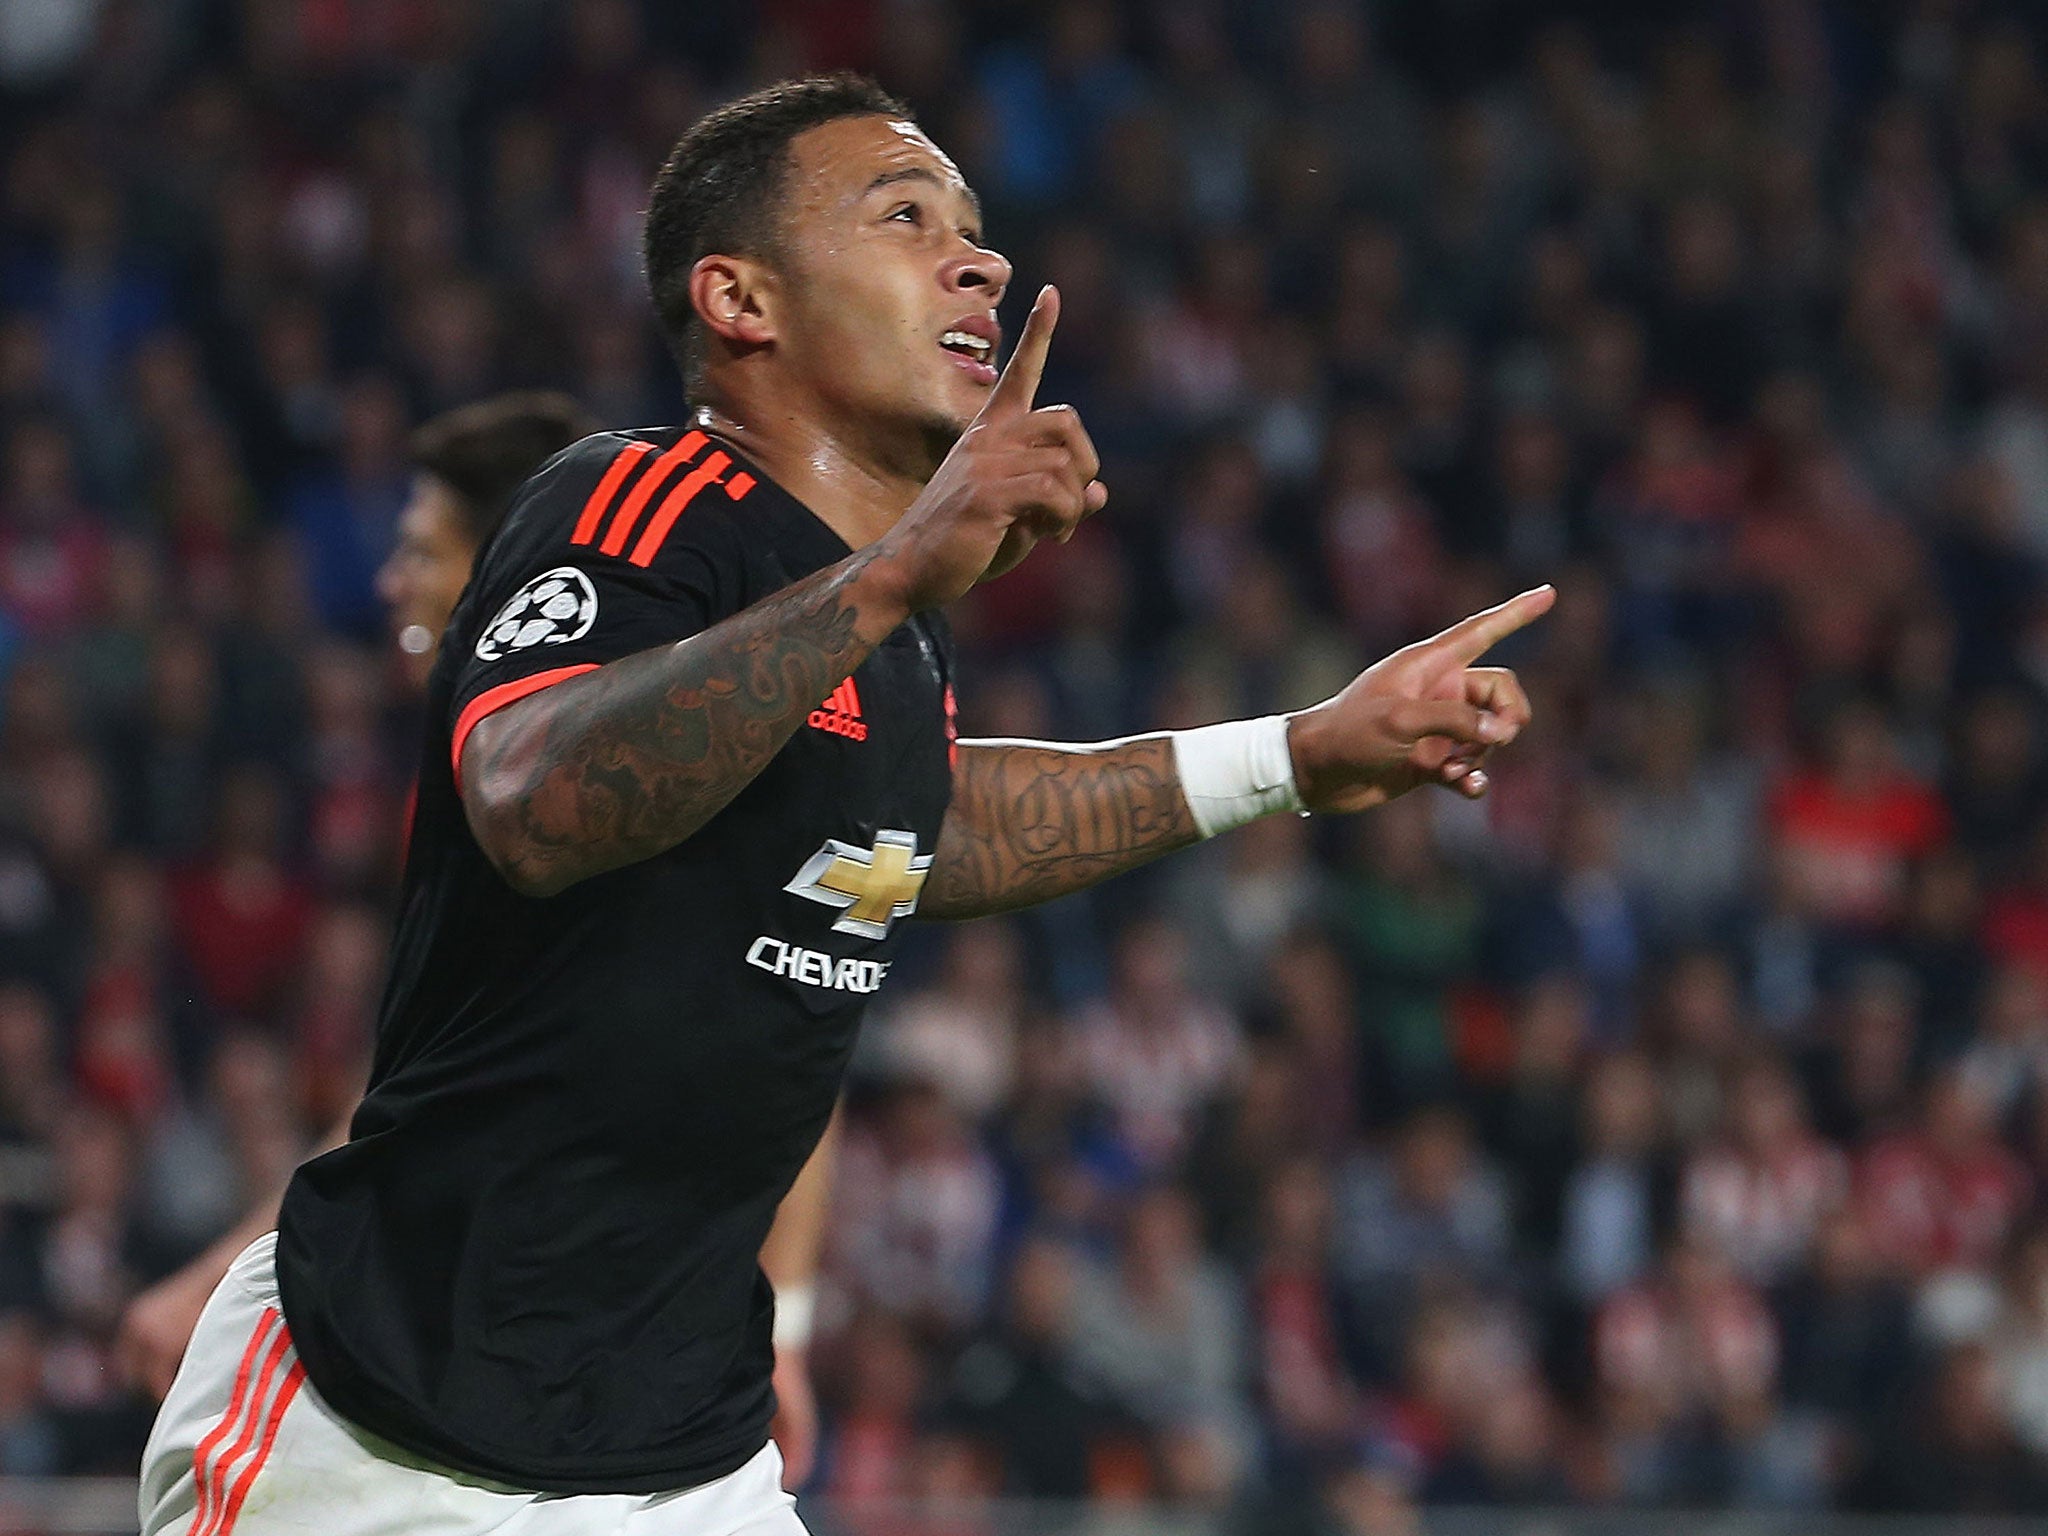 Memphis Depay celebrates a goal for Manchester United